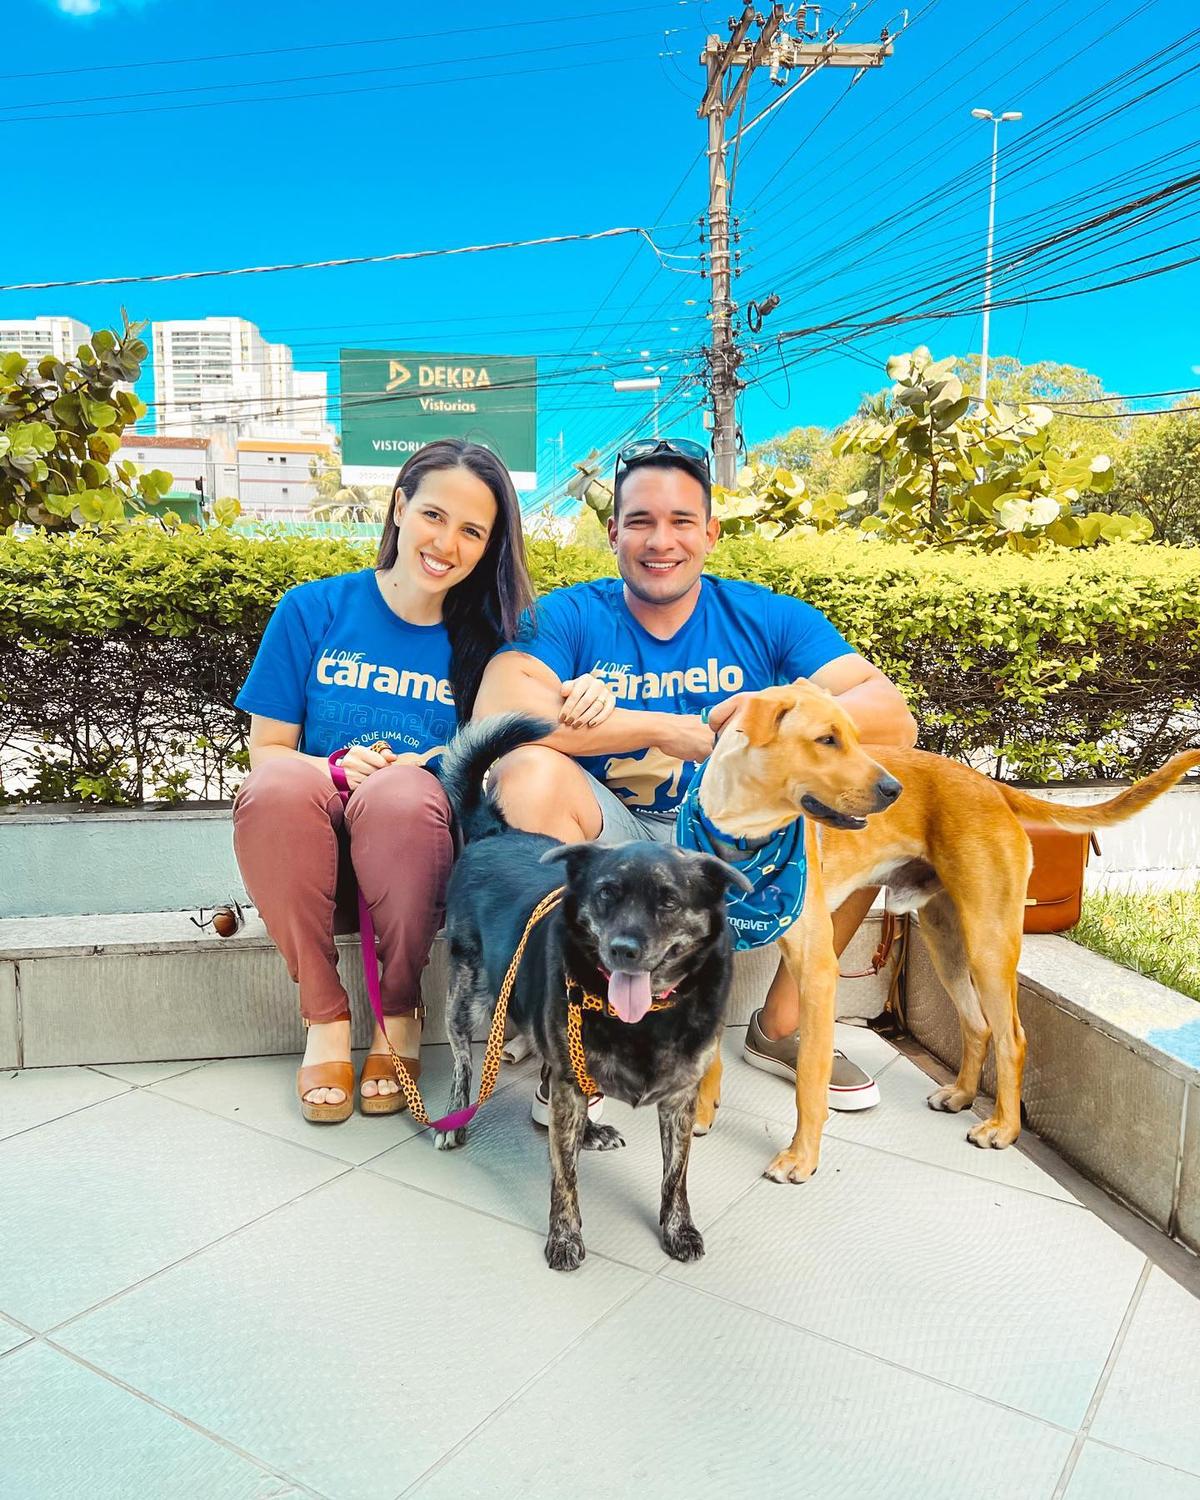 The couple with their dogs. (Courtesy of <a href="https://www.instagram.com/caramelodejesus/">@caramelodejesus</a>)